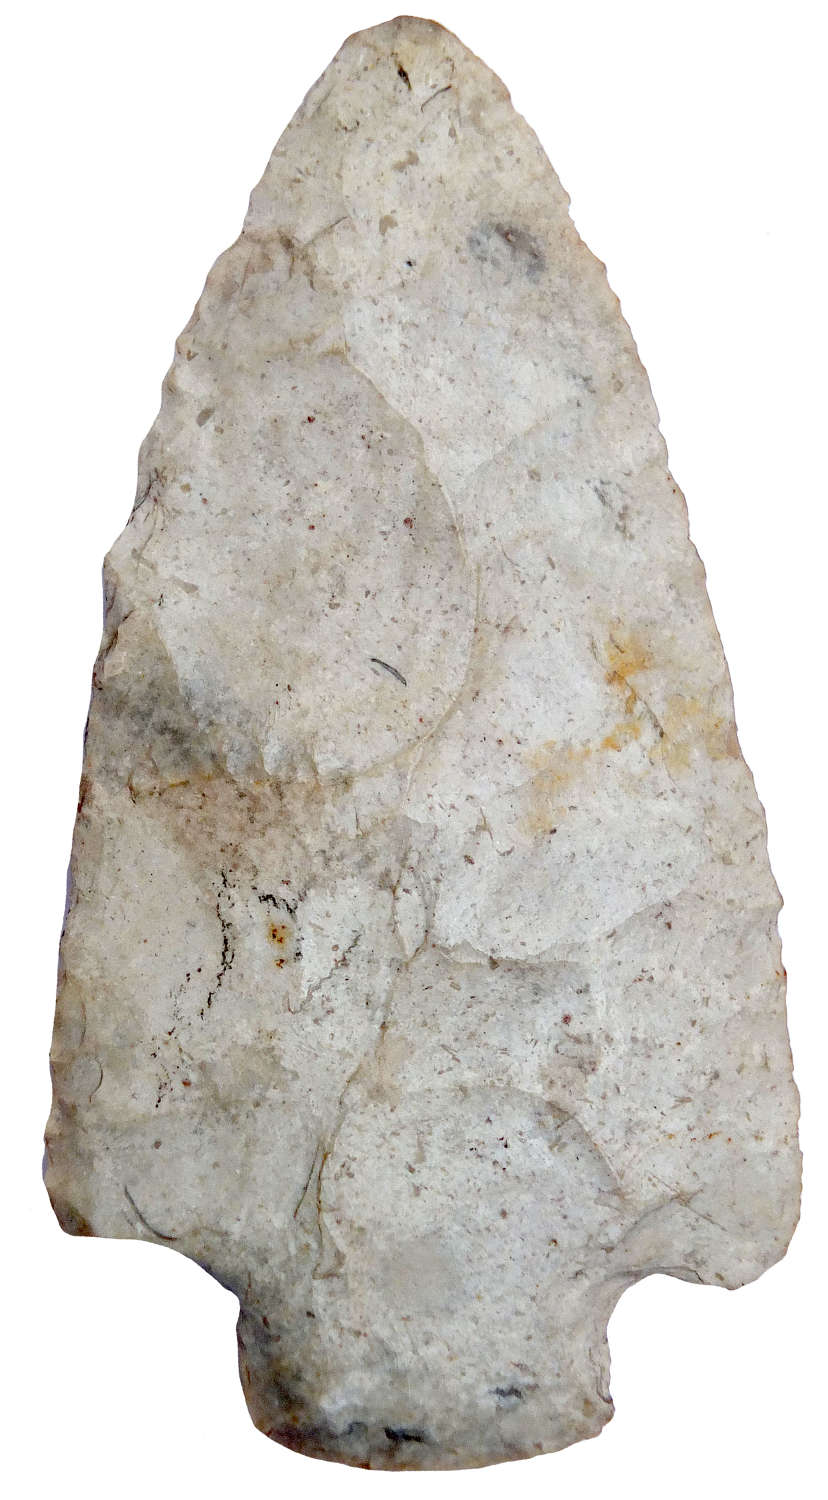 A North American Indian Archaic flint point, 8000-4500 years B.P.